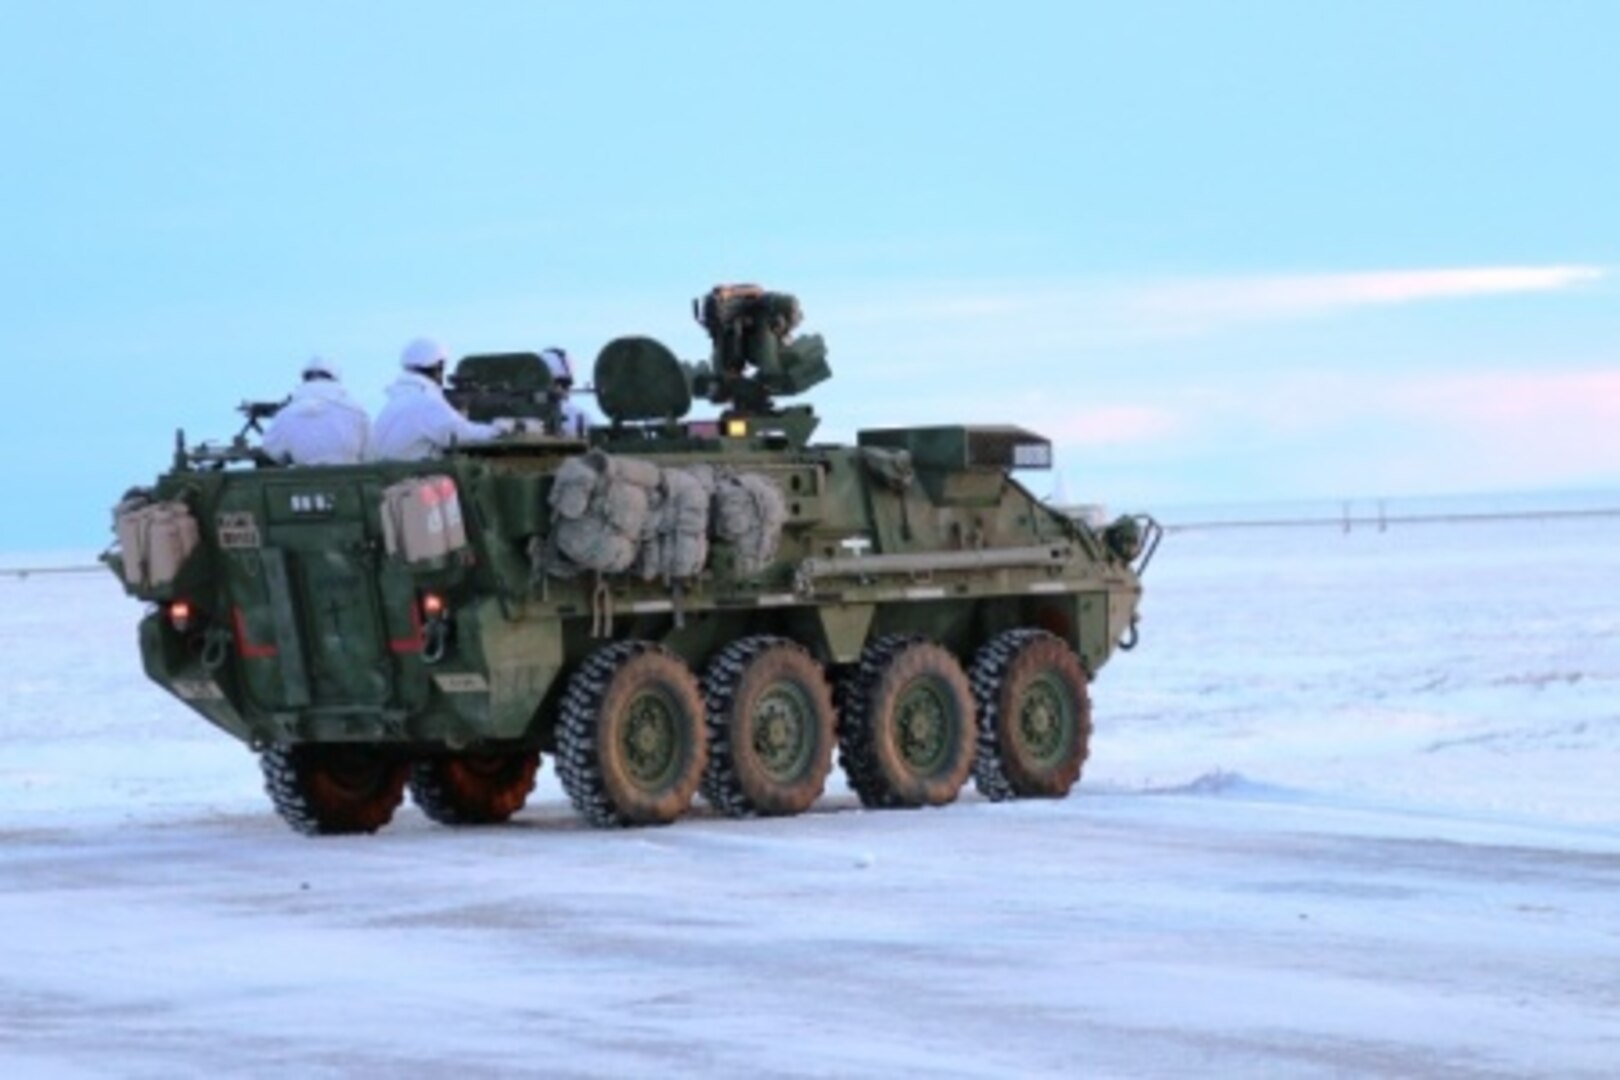 U.S. Army Alaska soldiers from Bravo Company, 3rd Battalion, 21st Infantry Regiment, 1st Stryker Brigade scan the Arctic tundra from the air-guard hatches of a Stryker vehicle operating outside Deadhorse, Alaska, during Operation Arctic Pegasus, Nov. 4, 2015. Courtesy photo